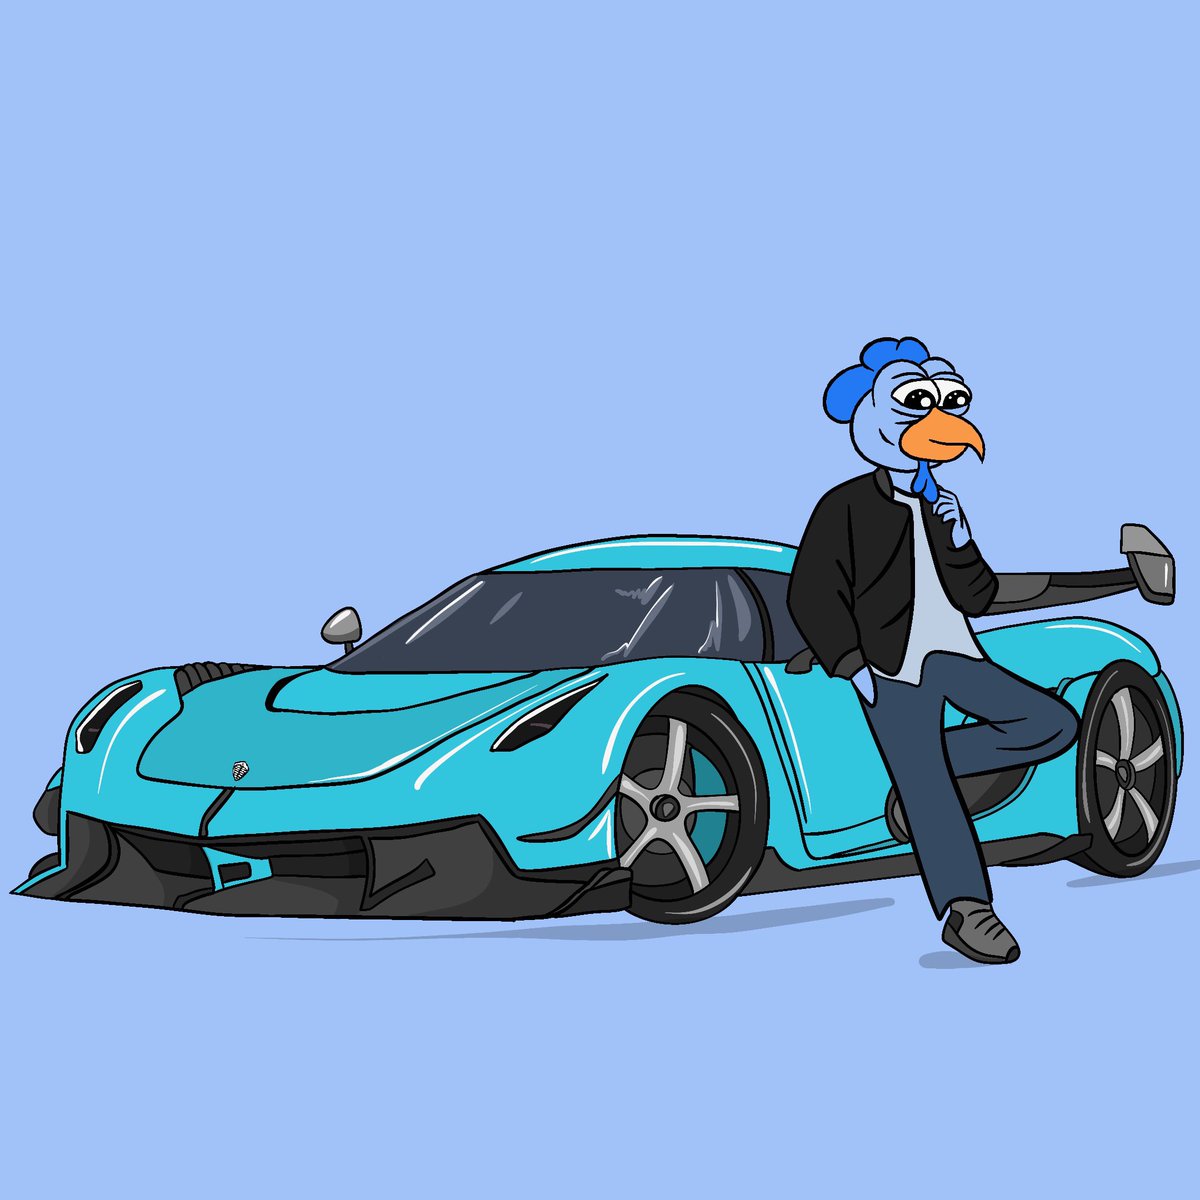 Fine, maybe $ROOST can’t ride in the Bugatti yet. What about your new Koenigsegg @cobratate?